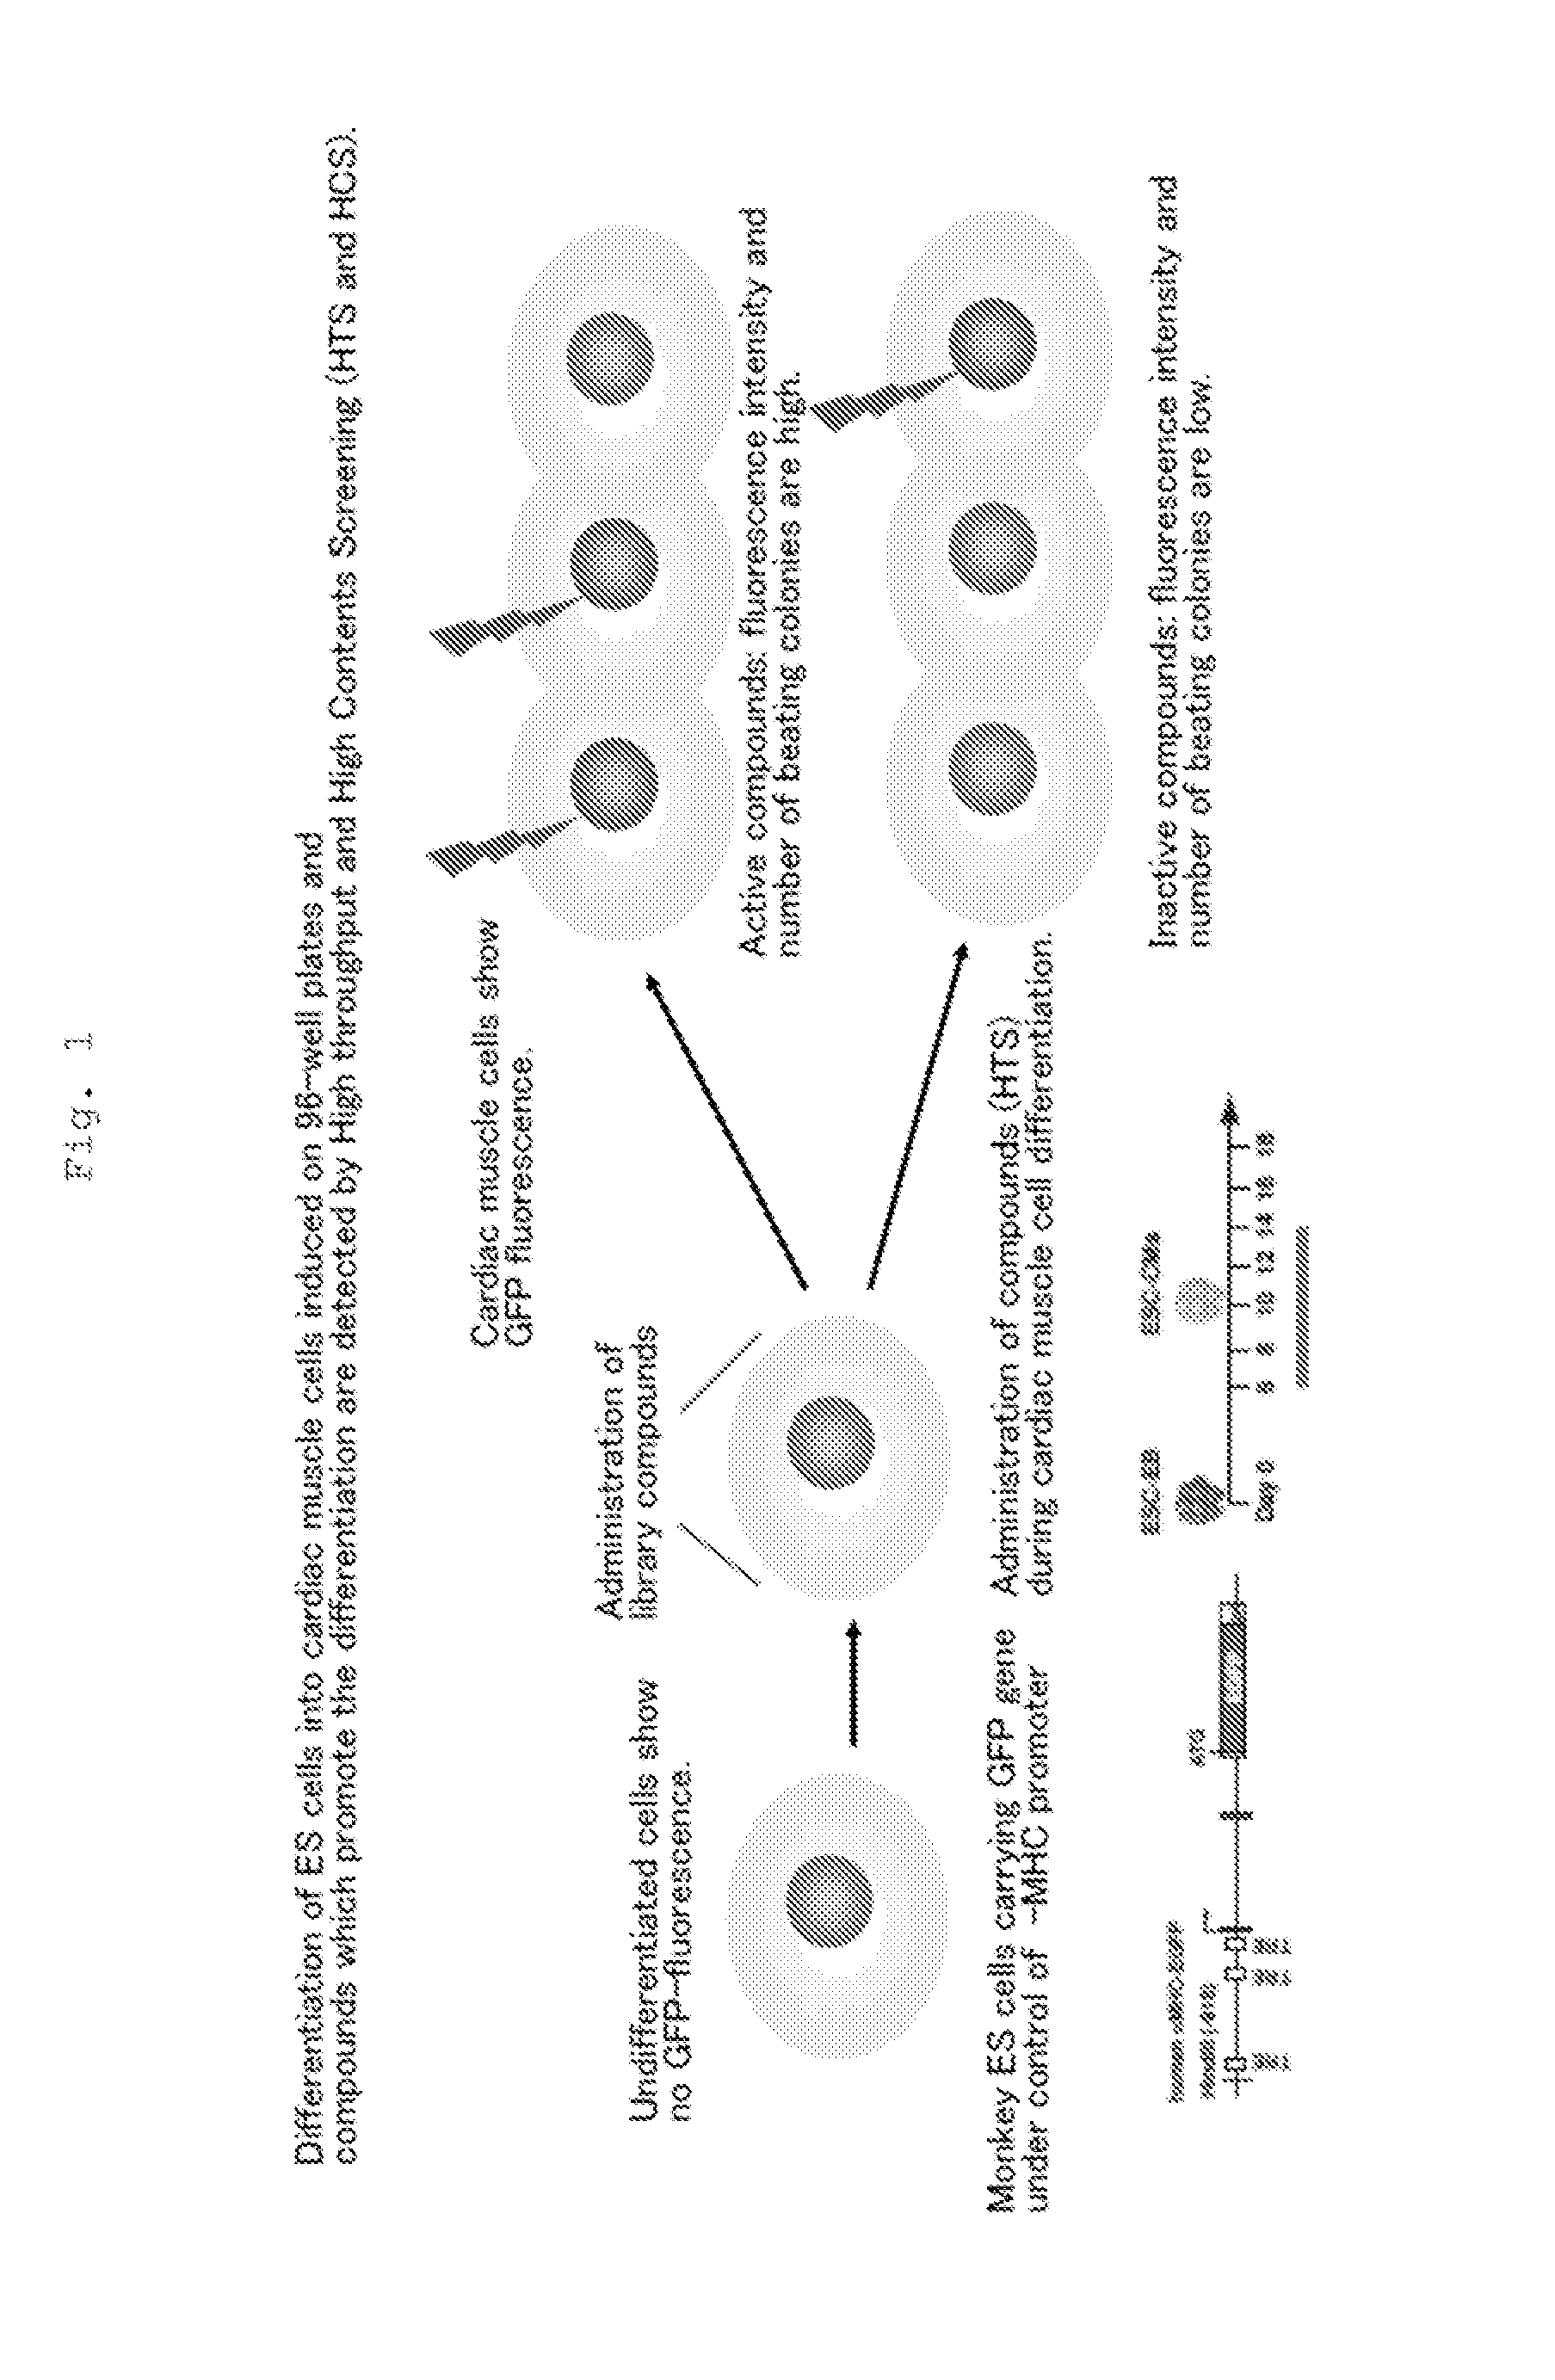 Method for promoting differentiation of pluripotent stem cells into cardiac muscle cells